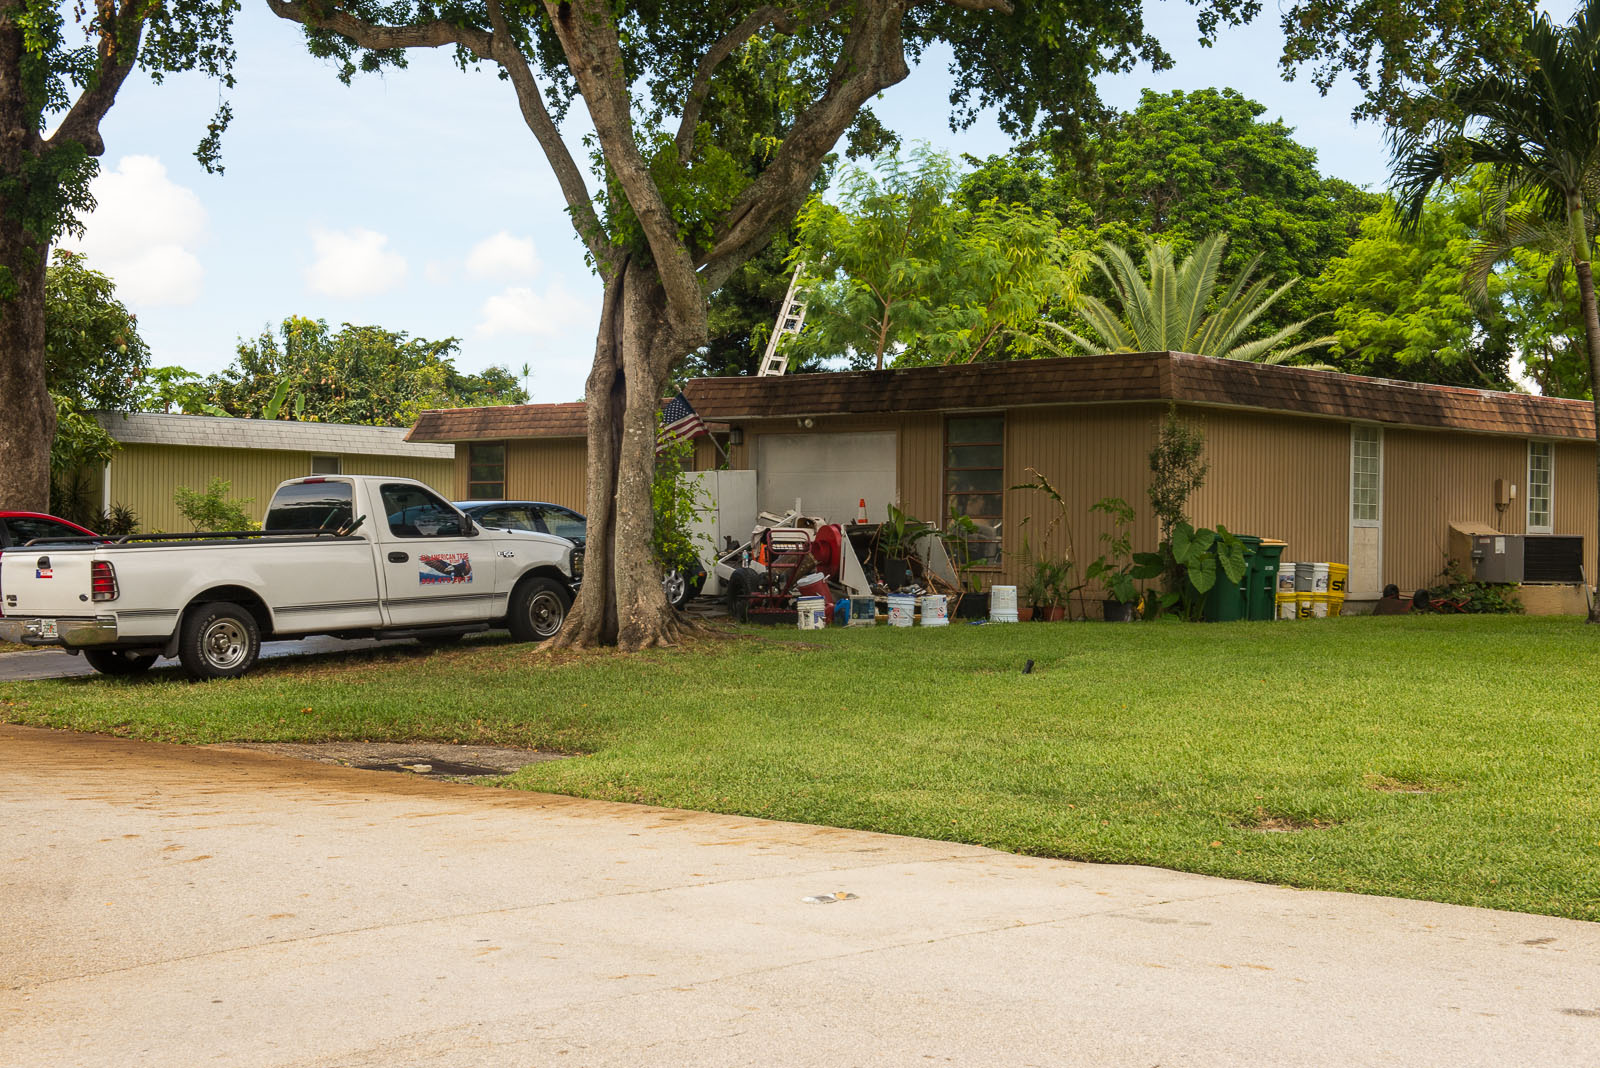 Homeowner Tired of Unkempt Home in Community